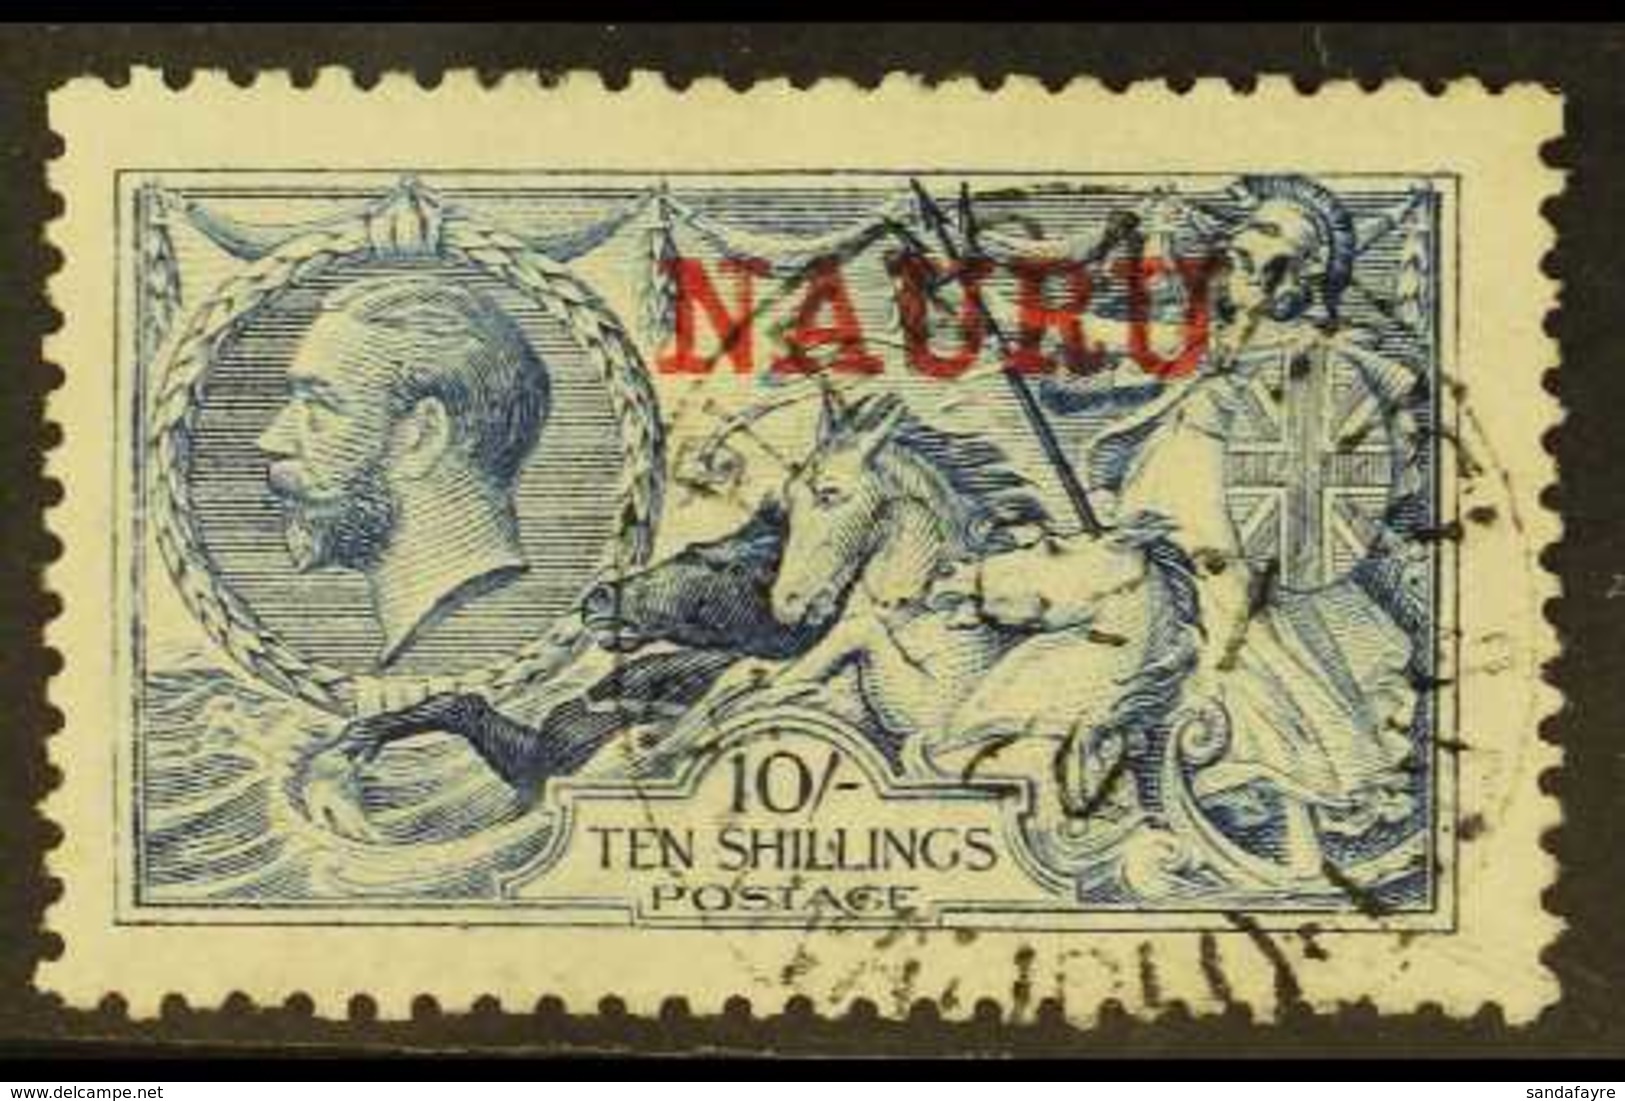 1916-23  10s Deep Bright Blue De La Rue Seahorse, SG 23d, Very Fine Used Example Of This Scarce Stamp. For More Images,  - Nauru